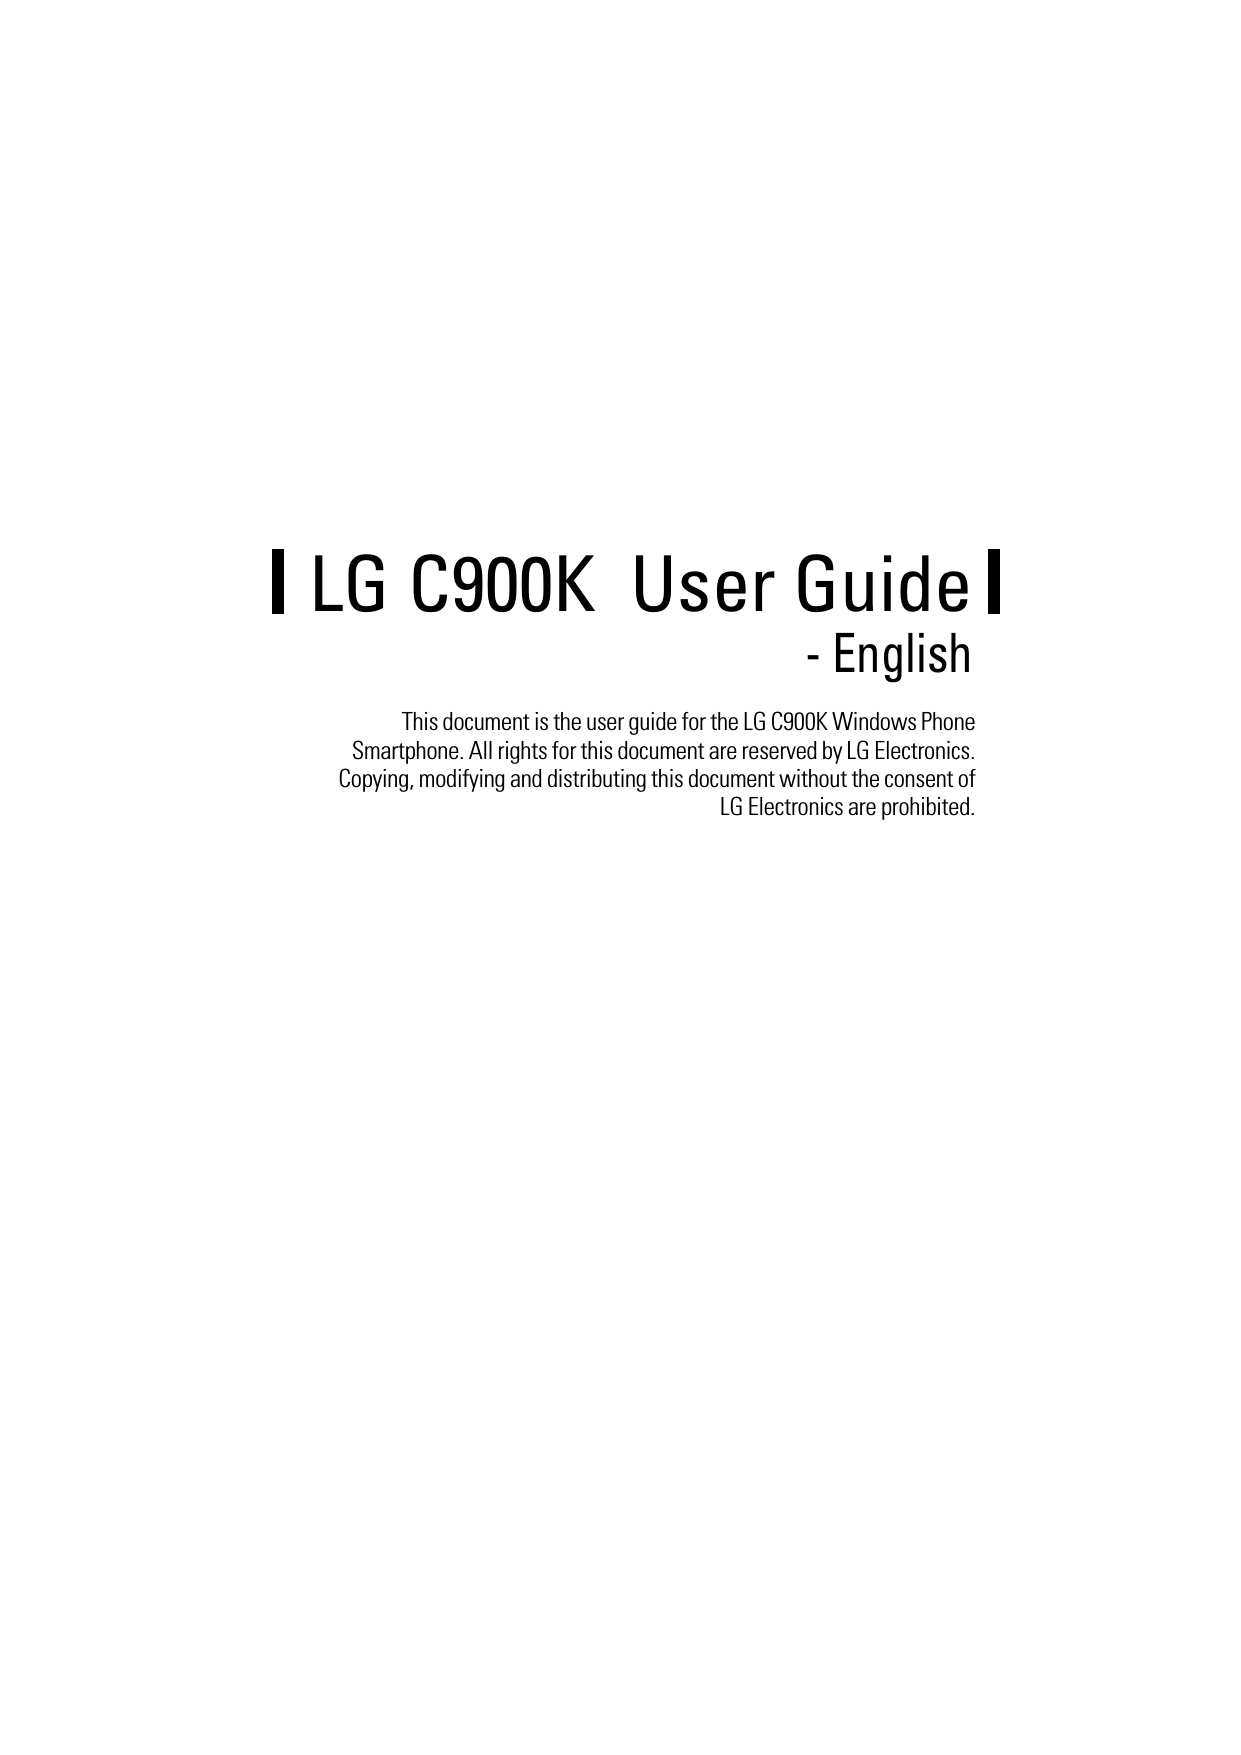 This document is the user guide for the LG C900K Windows Phone Smartphone. All rights for this document are reserved by LG Electronics. Copying, modifying and distributing this document without the consent of LG Electronics are prohibited.LG C900K  User Guide - English